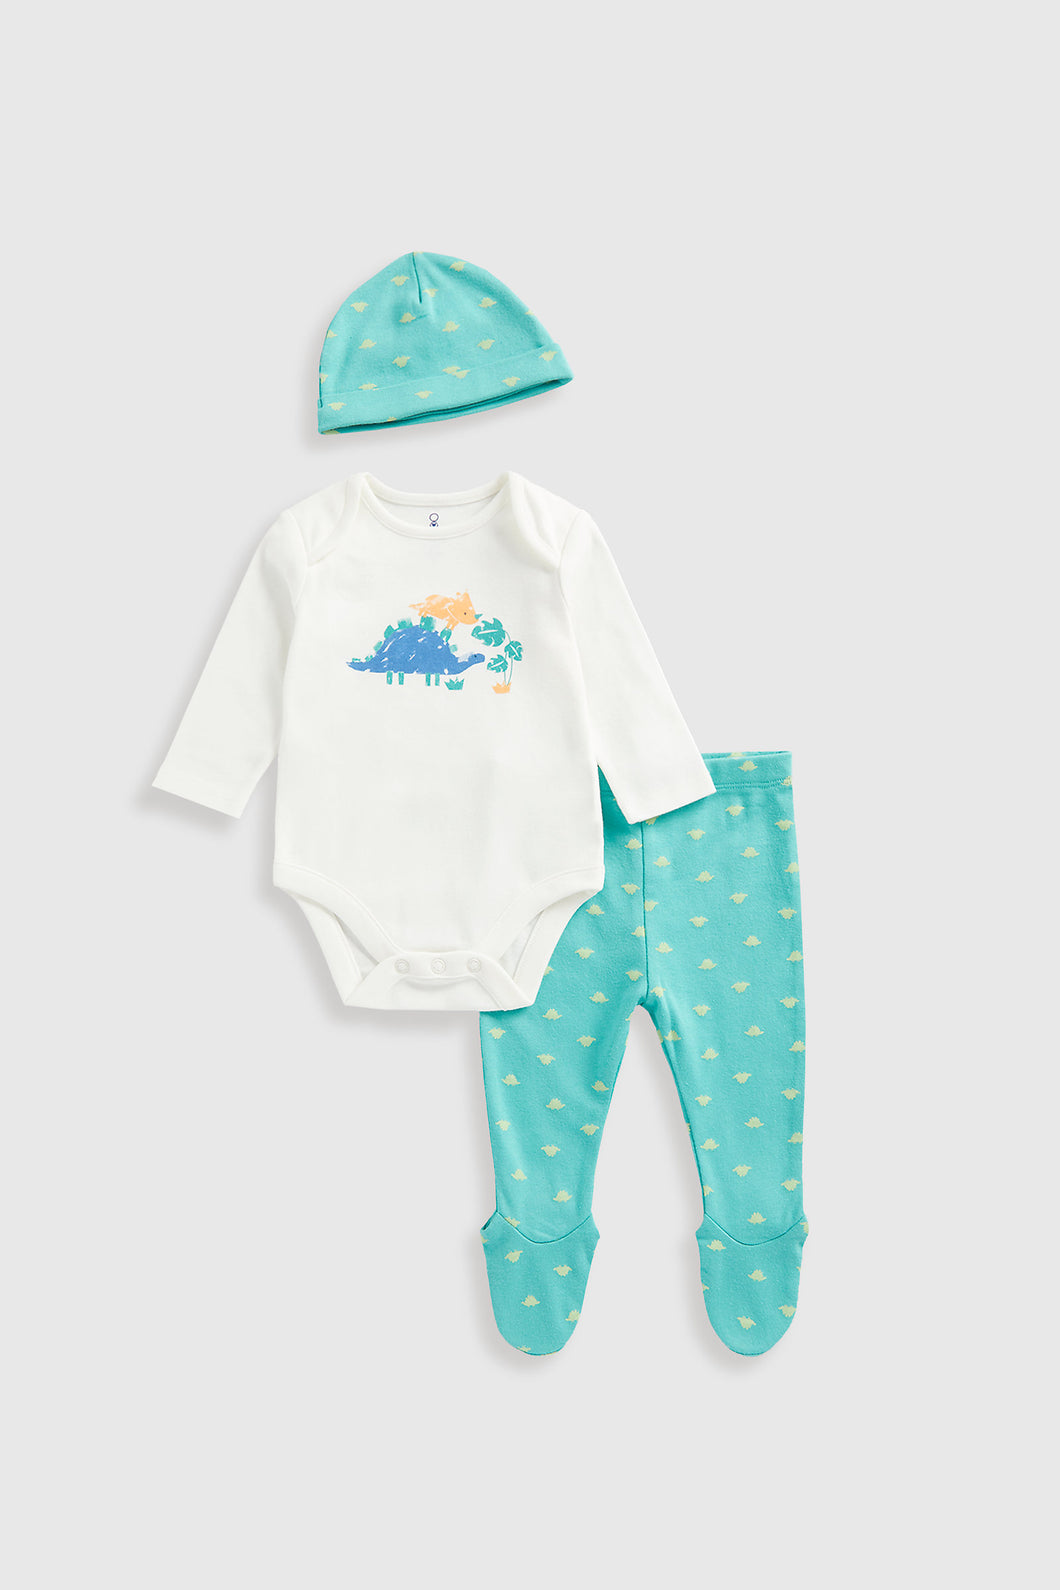 Mothercare Dinosaur 3-Piece Baby Outfit Set